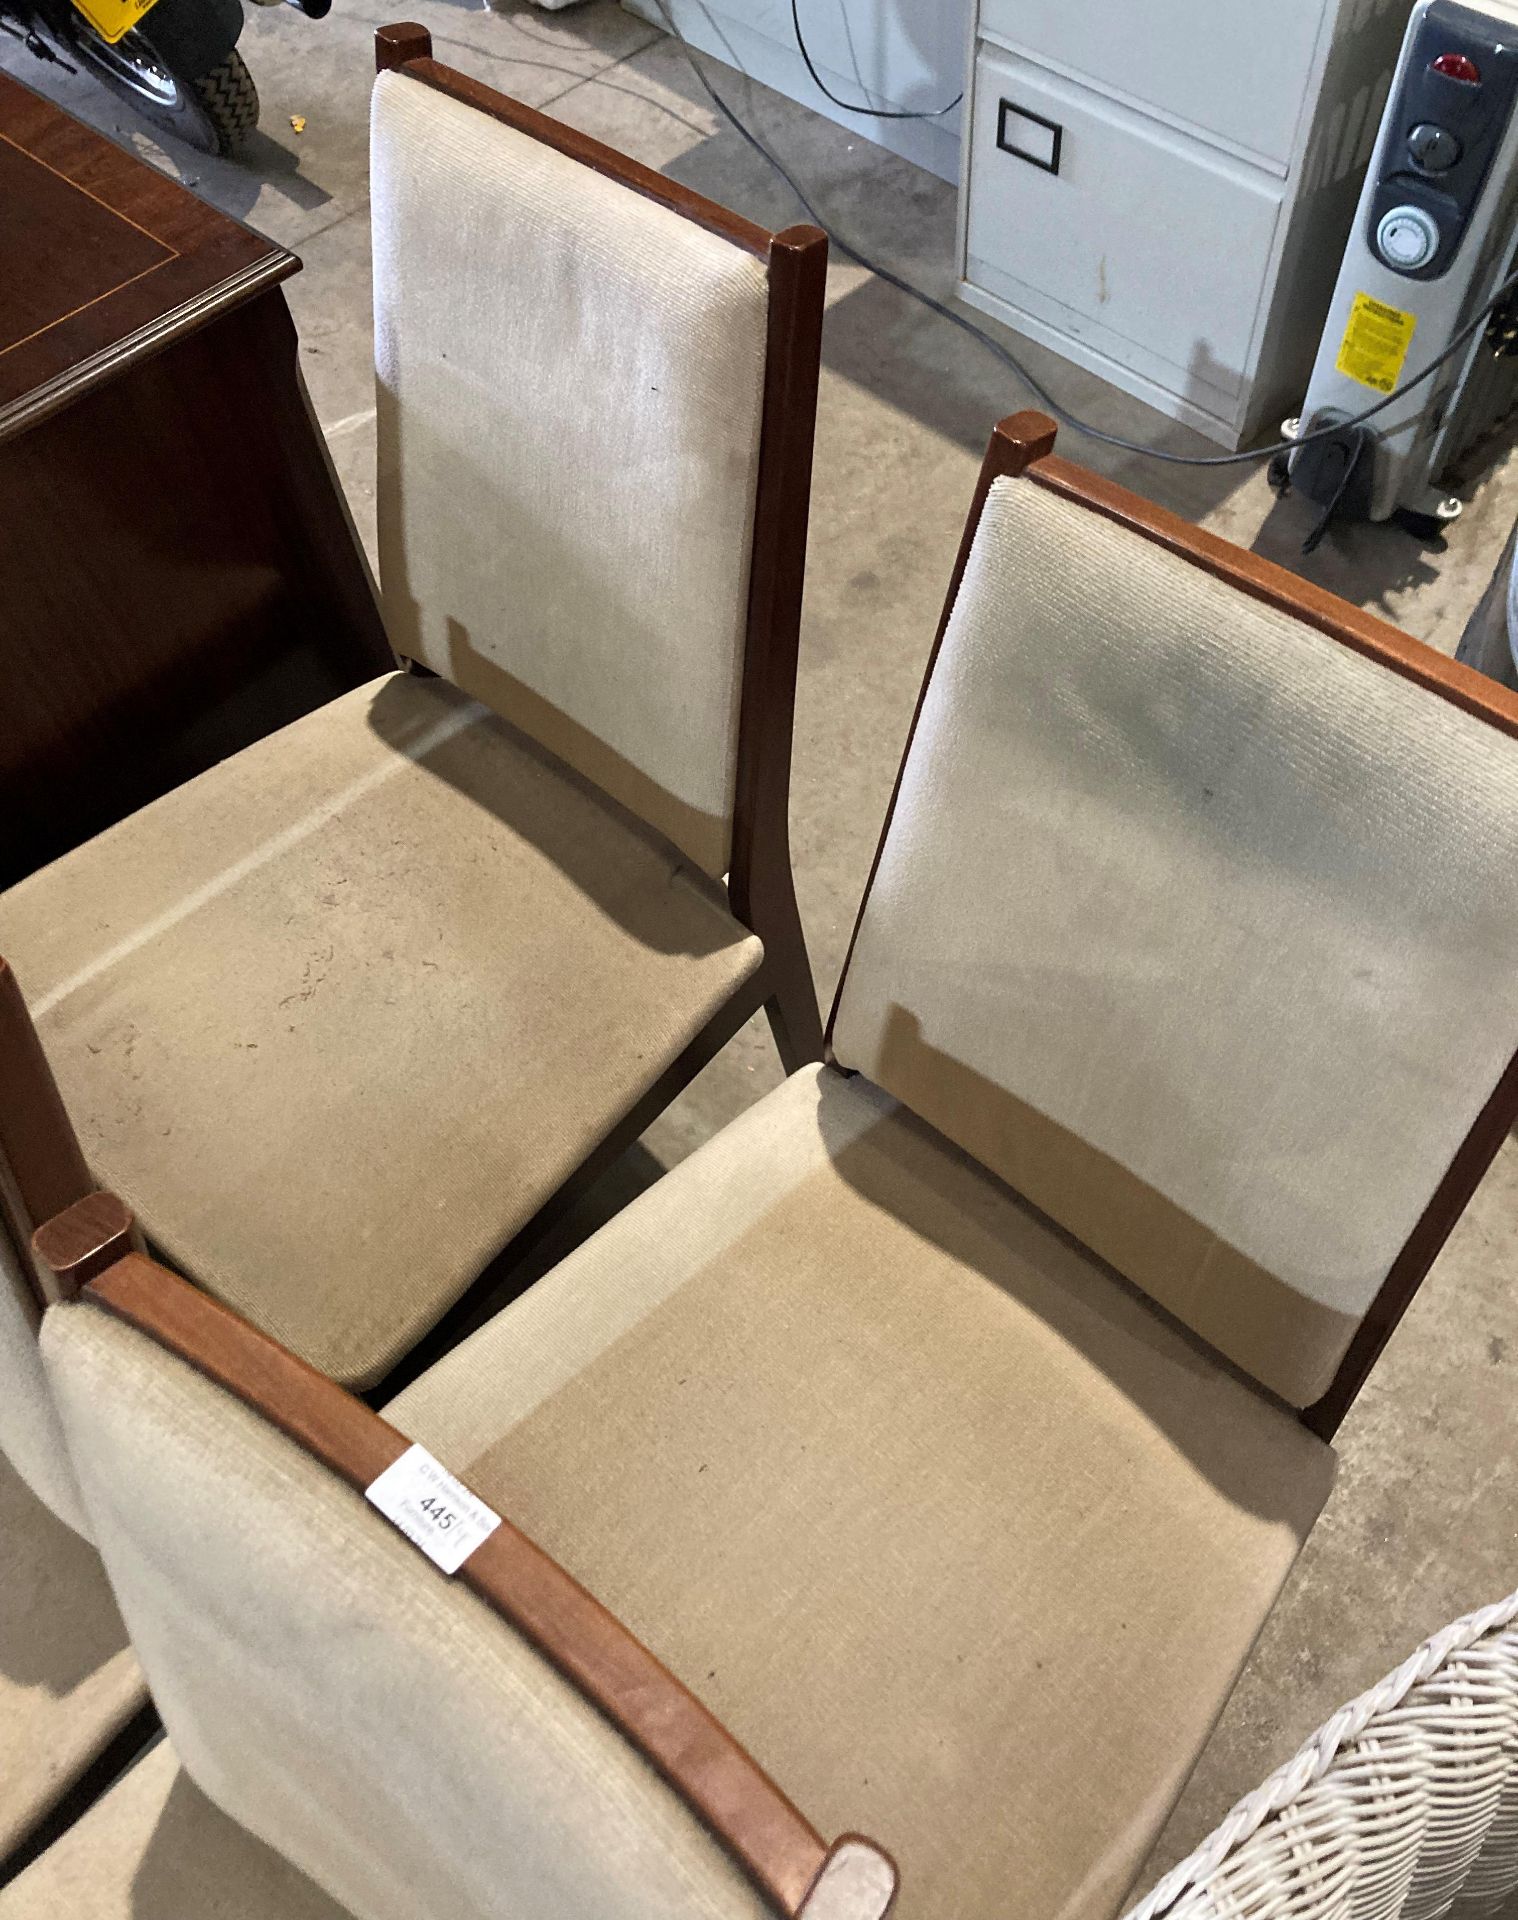 Set of four teak framed dining chairs with beige cloth seats (saleroom location: MA6) - Image 2 of 2